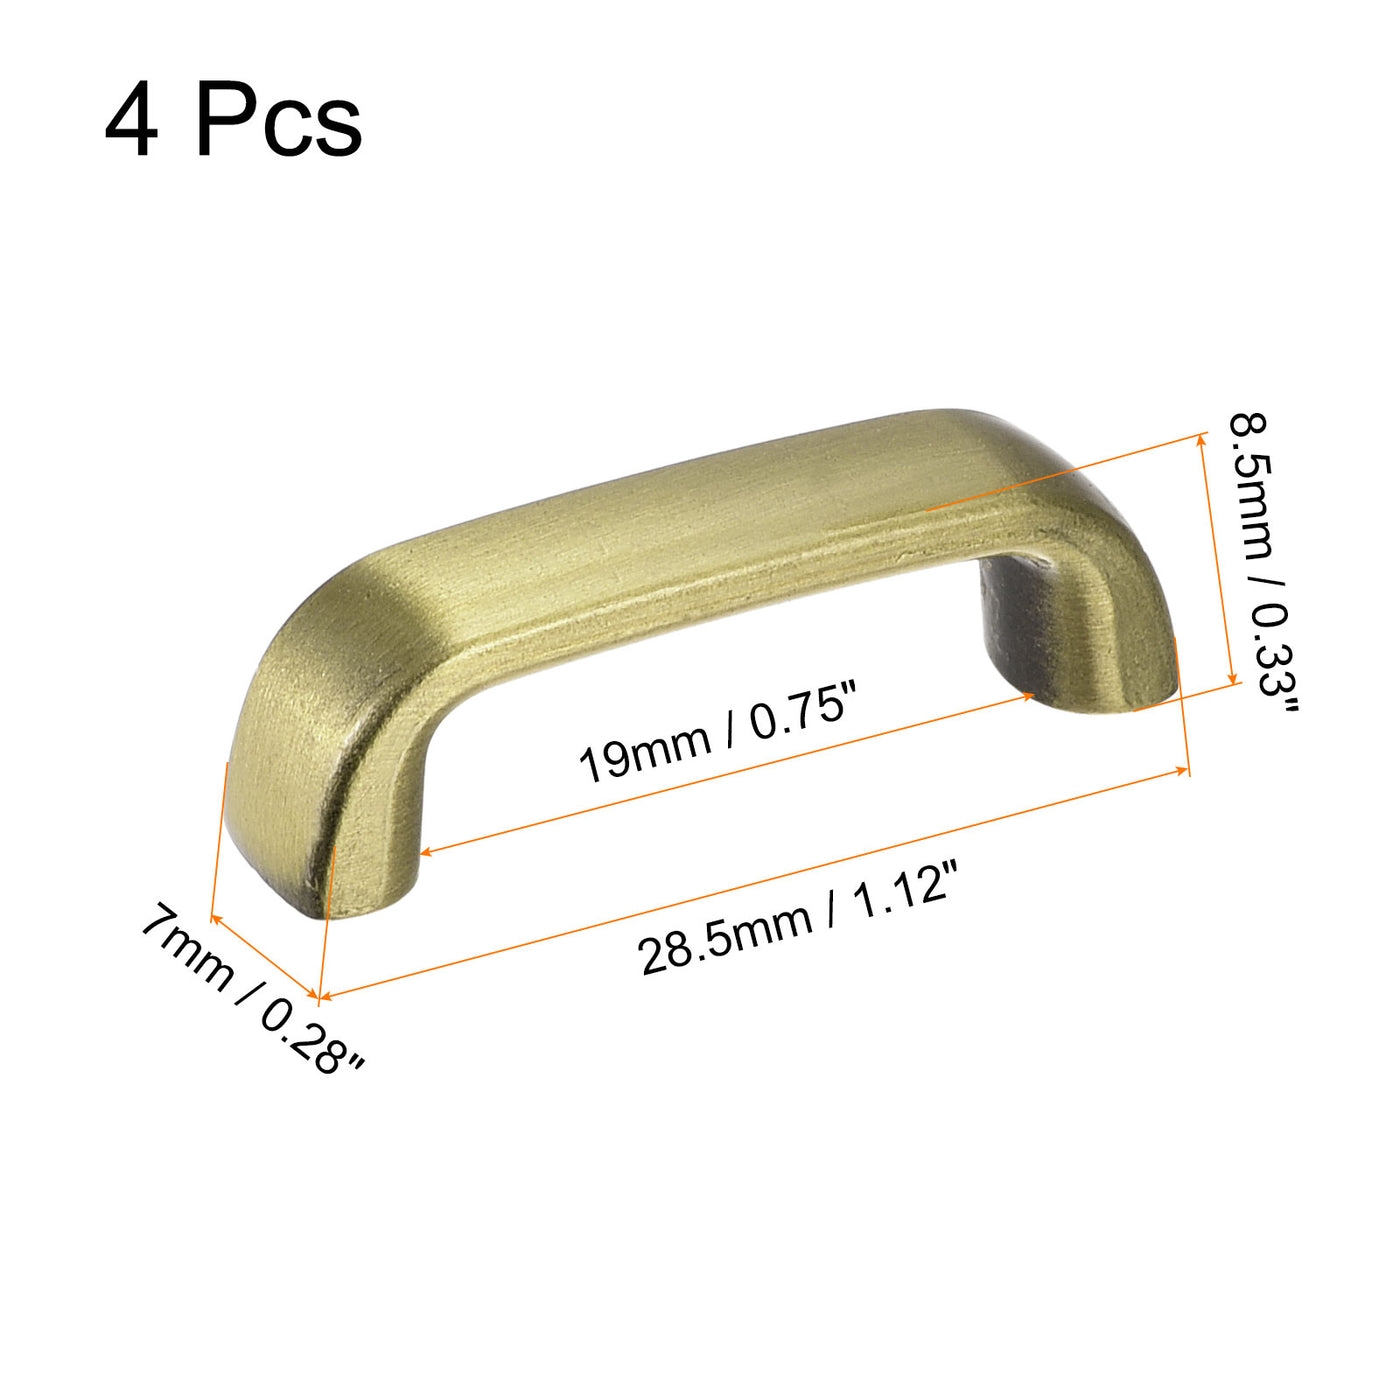 Uxcell Uxcell Arch Bridge Buckle, 4Pcs 29mm D-Ring Connector Buckle for Bag Hanger DIY, Bronze